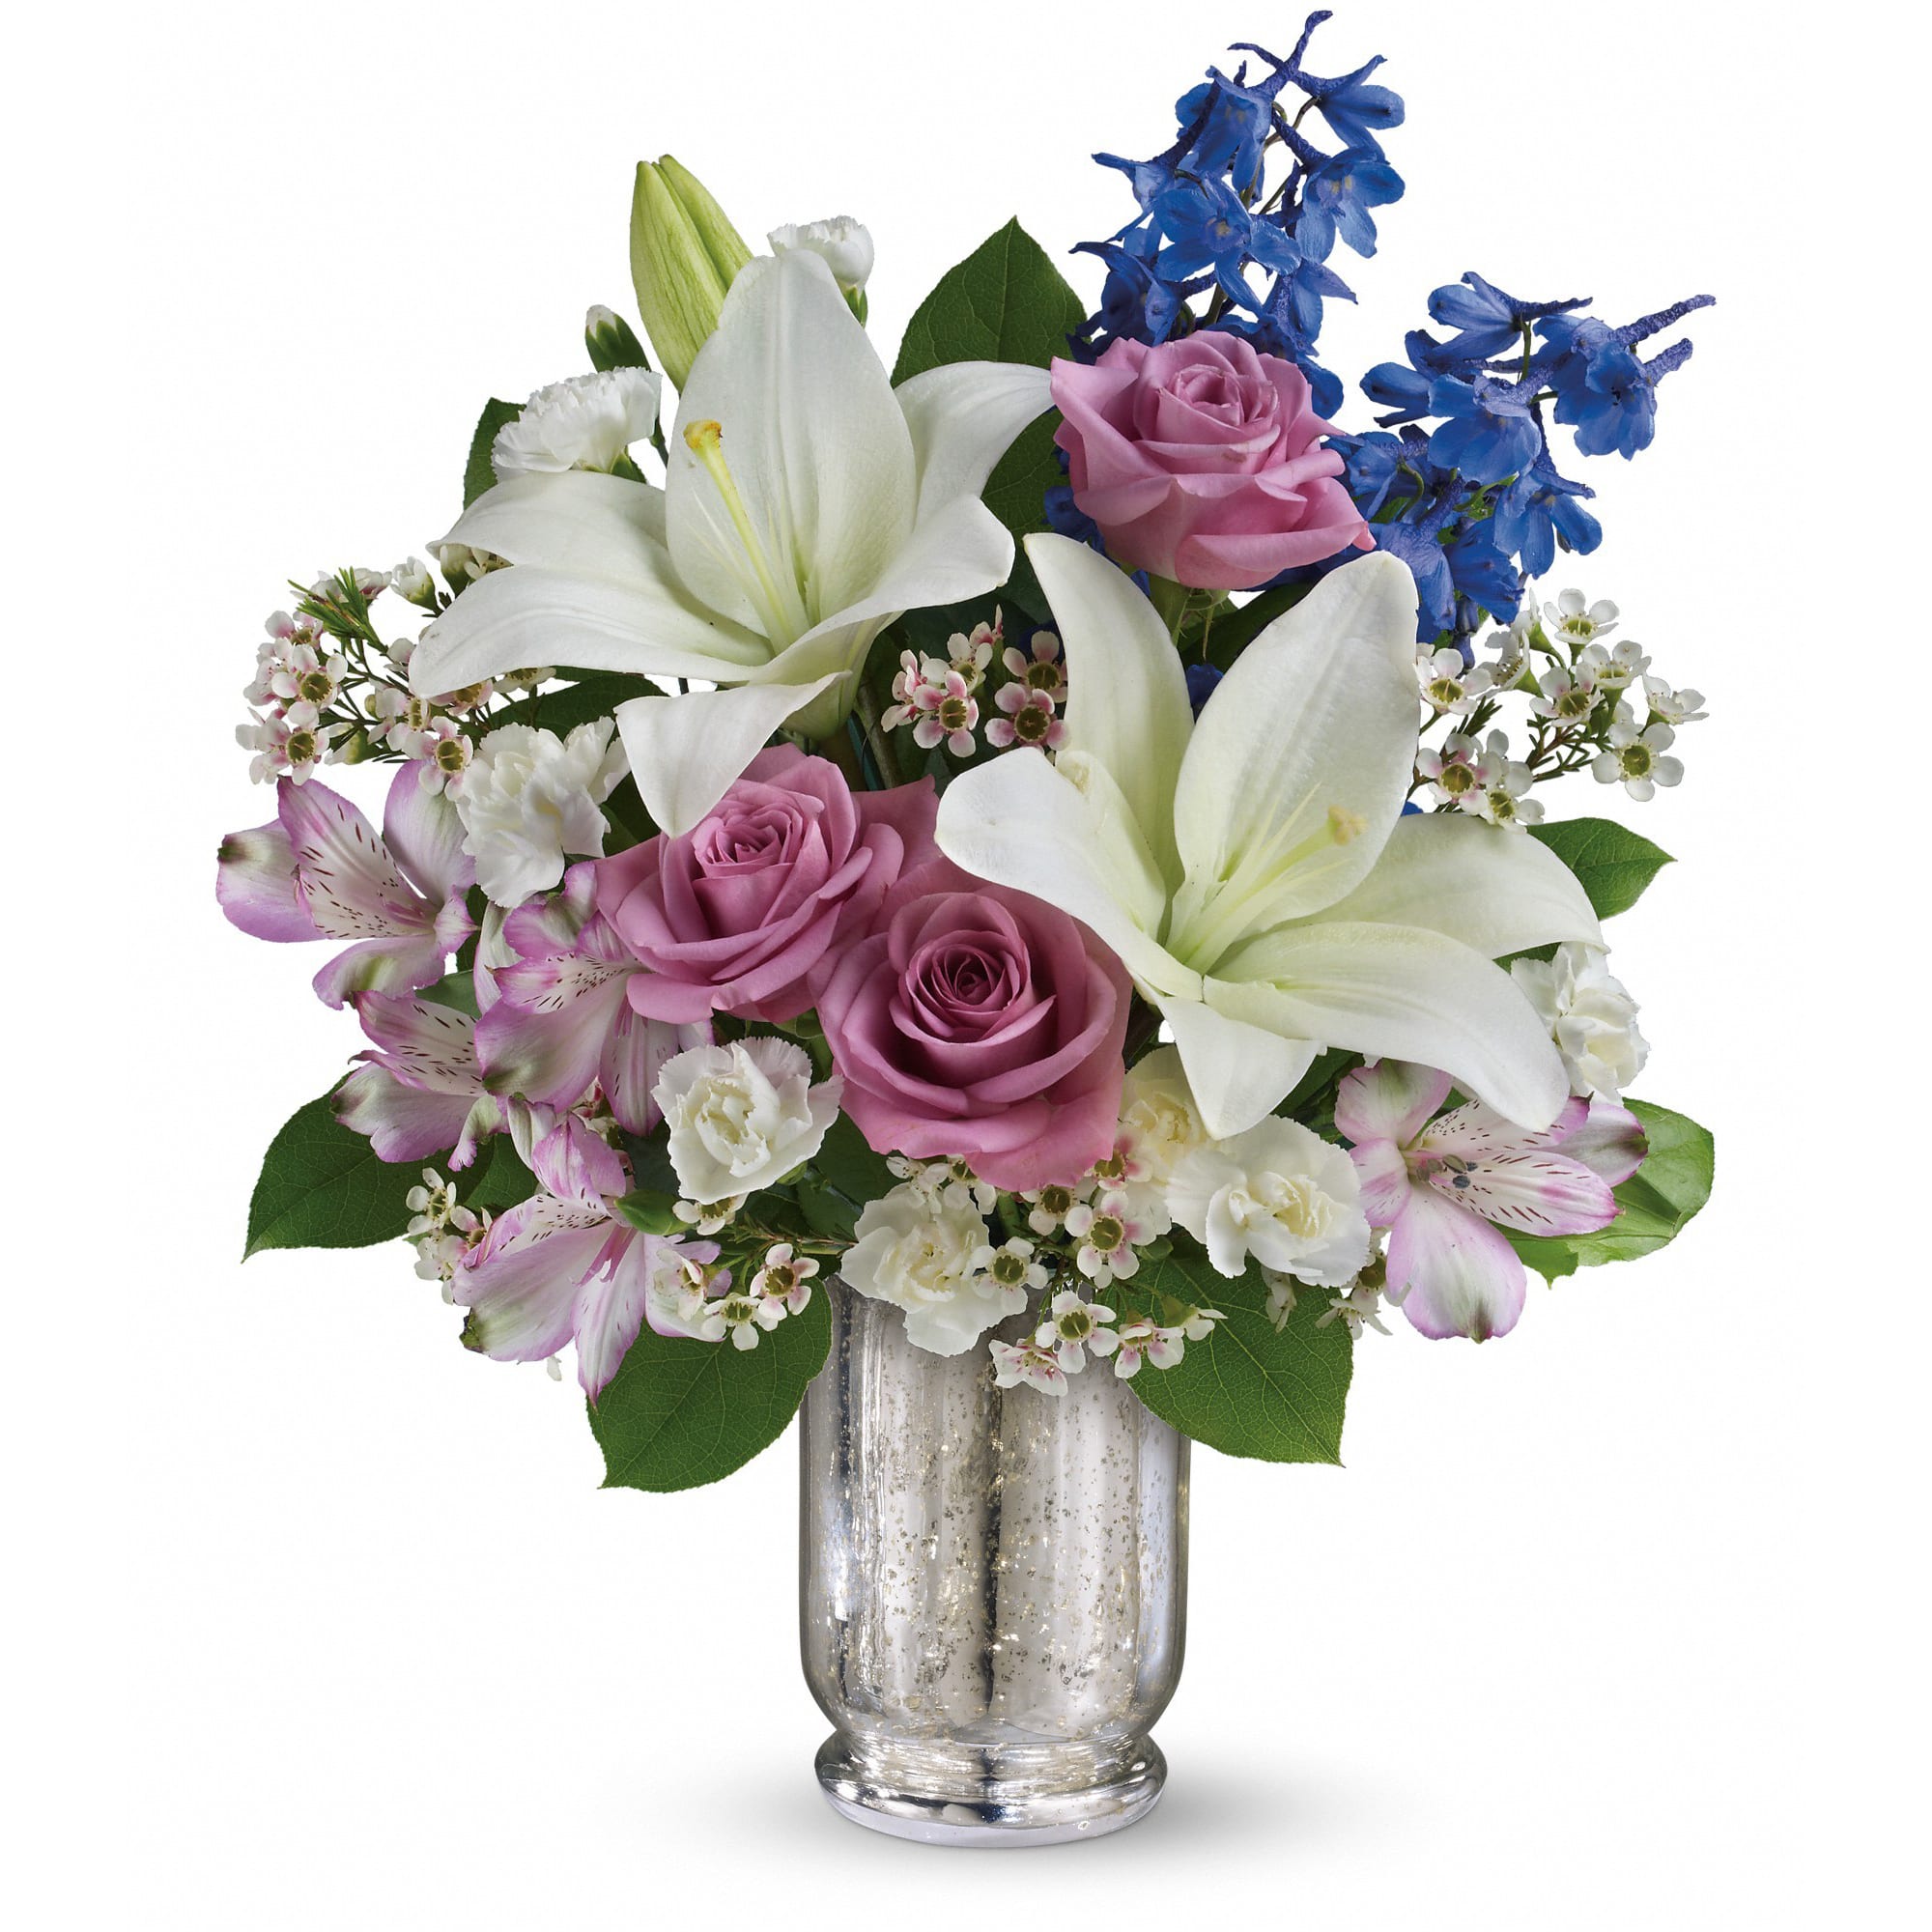 Teleflora's Garden Of Dreams Bouquet - Make her dreams come true with this ethereal bouquet, presented in a stunning Mercury Glass hurricane. Beautiful snow-white lilies, lavender roses and a bright blue hint of delphinium create a dreamy declaration of your affection she'll never forget.  